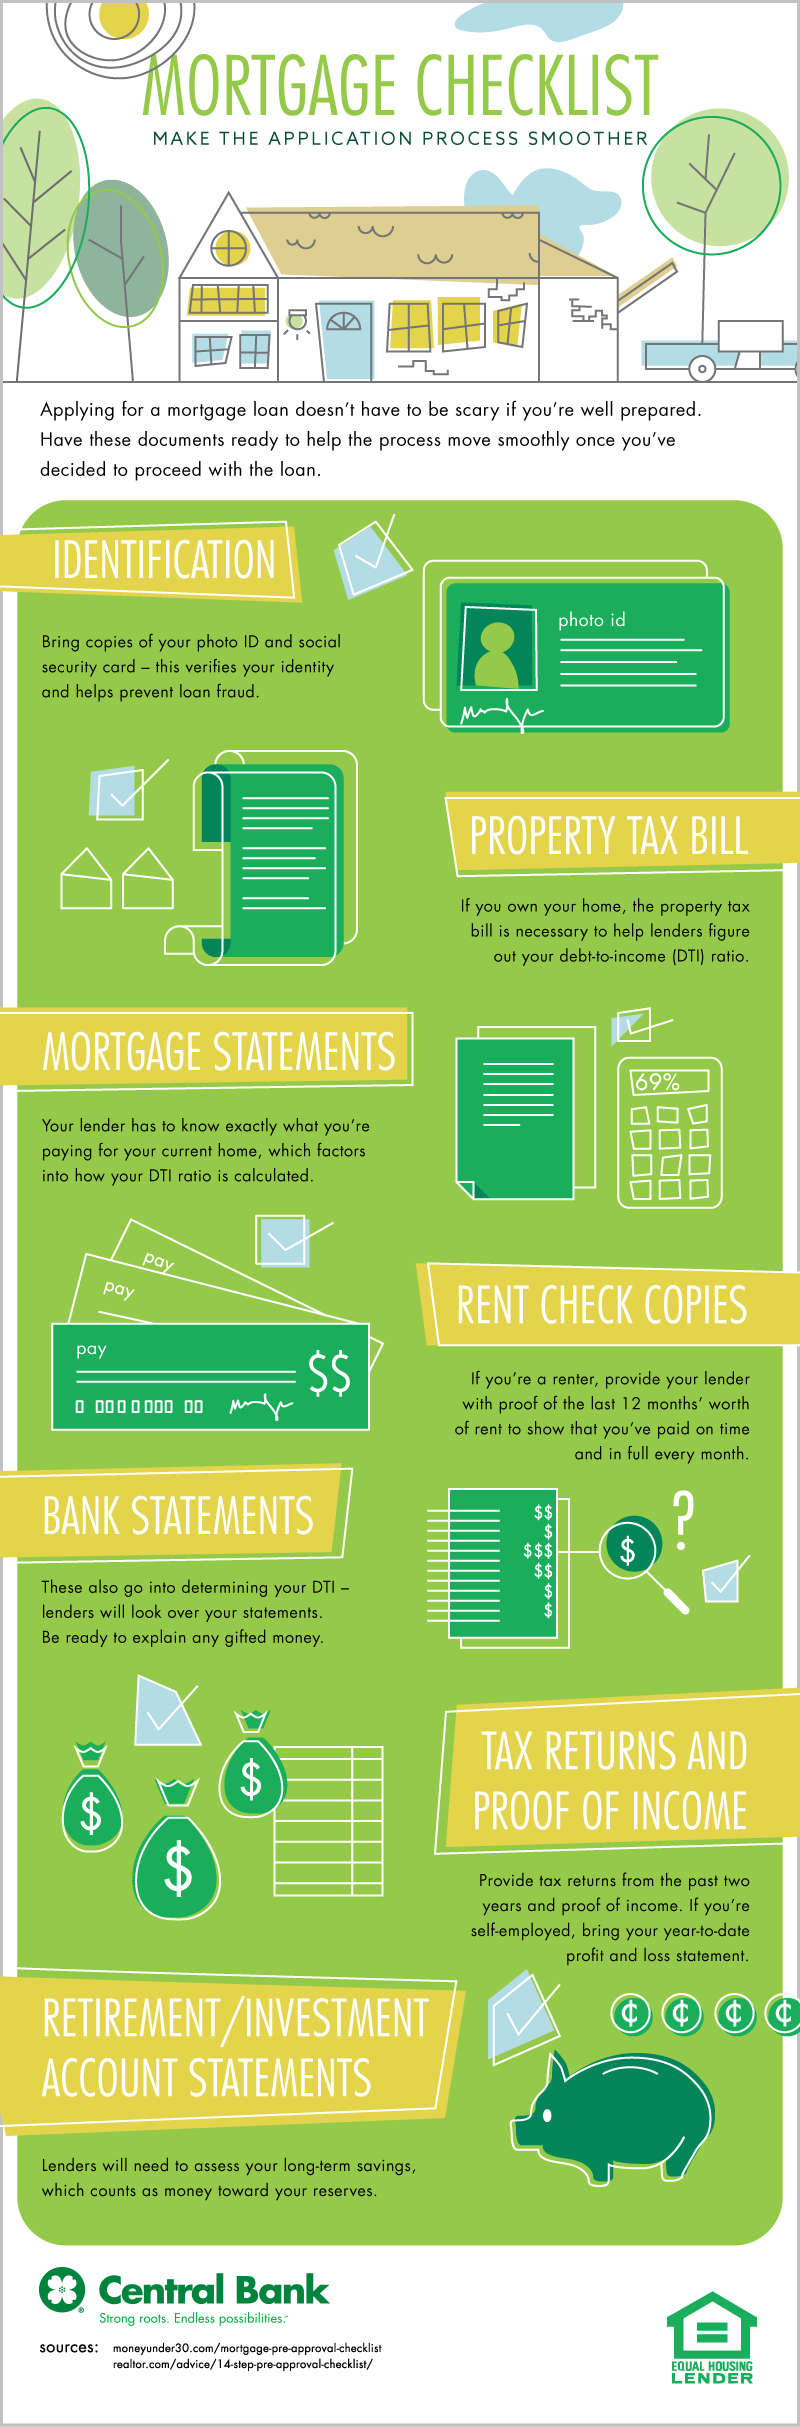 Infographic with a mortgage checklist